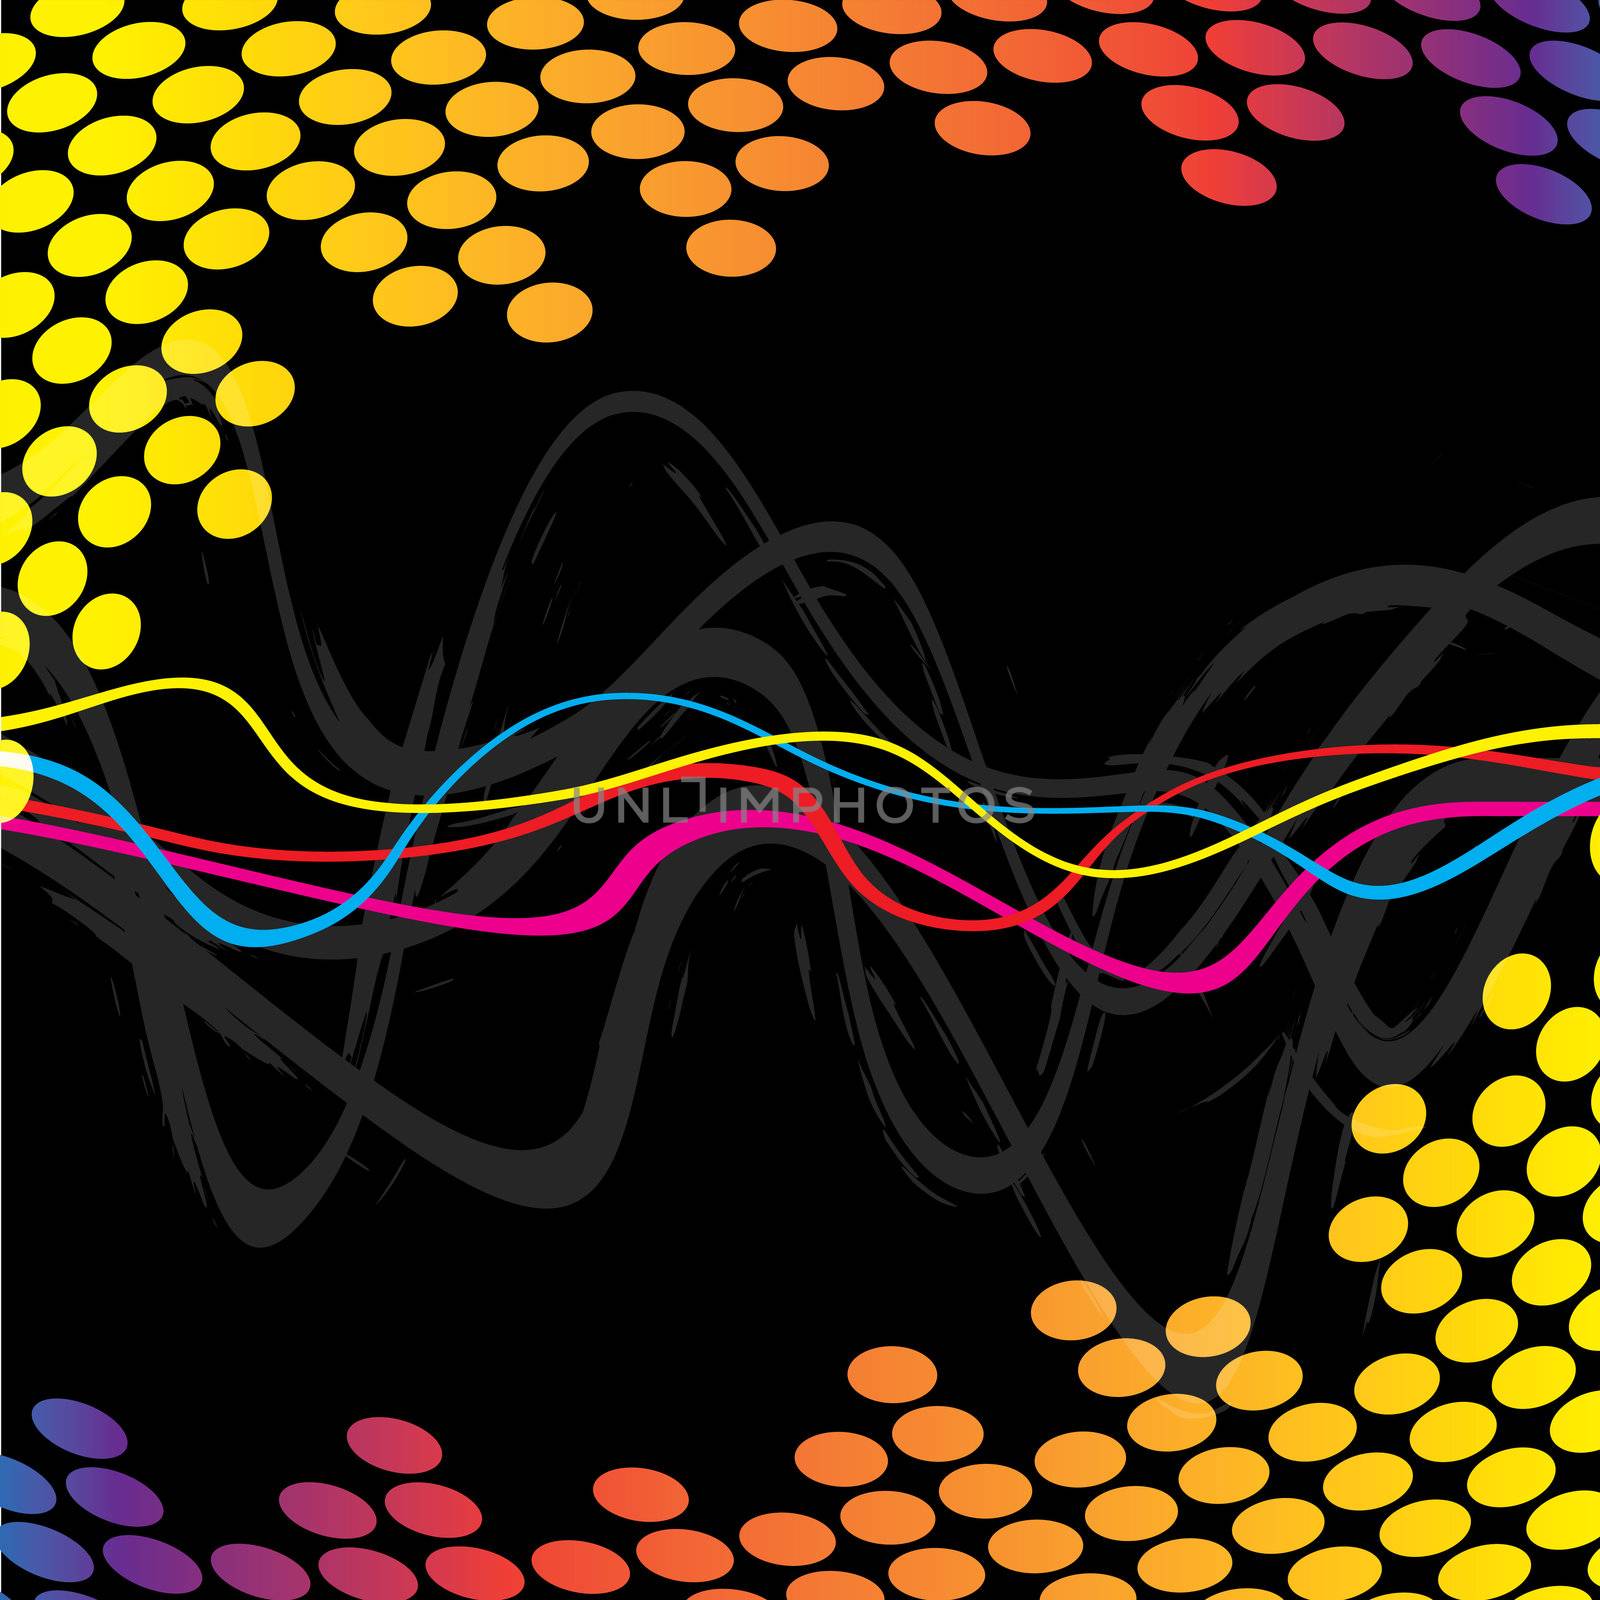 A wavy lines background indicating frequency or audio waves.